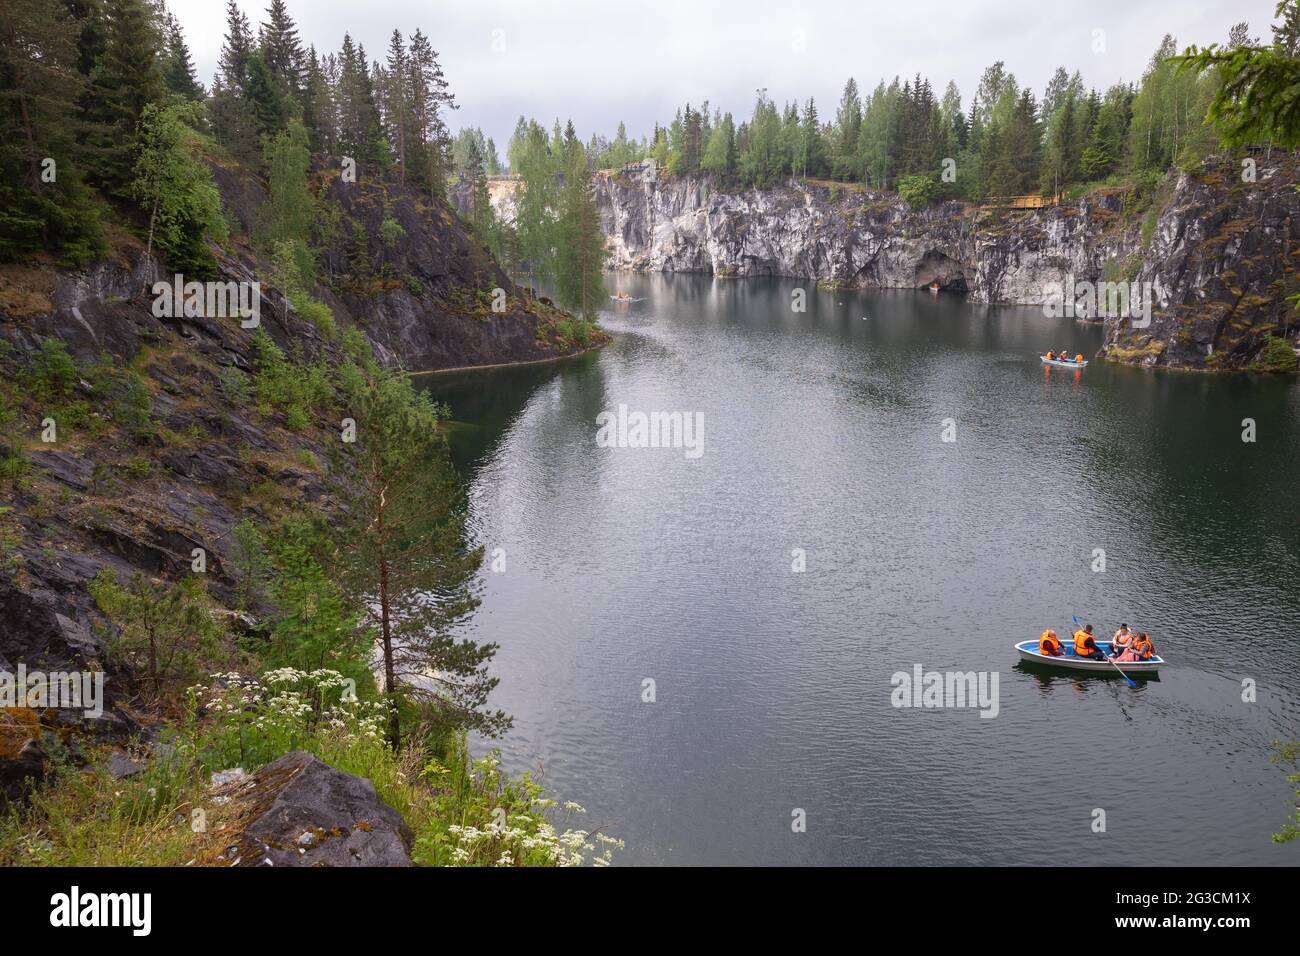 Ruskeala, Russia - June 12, 2021: Karelian landscape with tourists in a boat sailing through a former marble quarry filled with groundwater Stock Photo